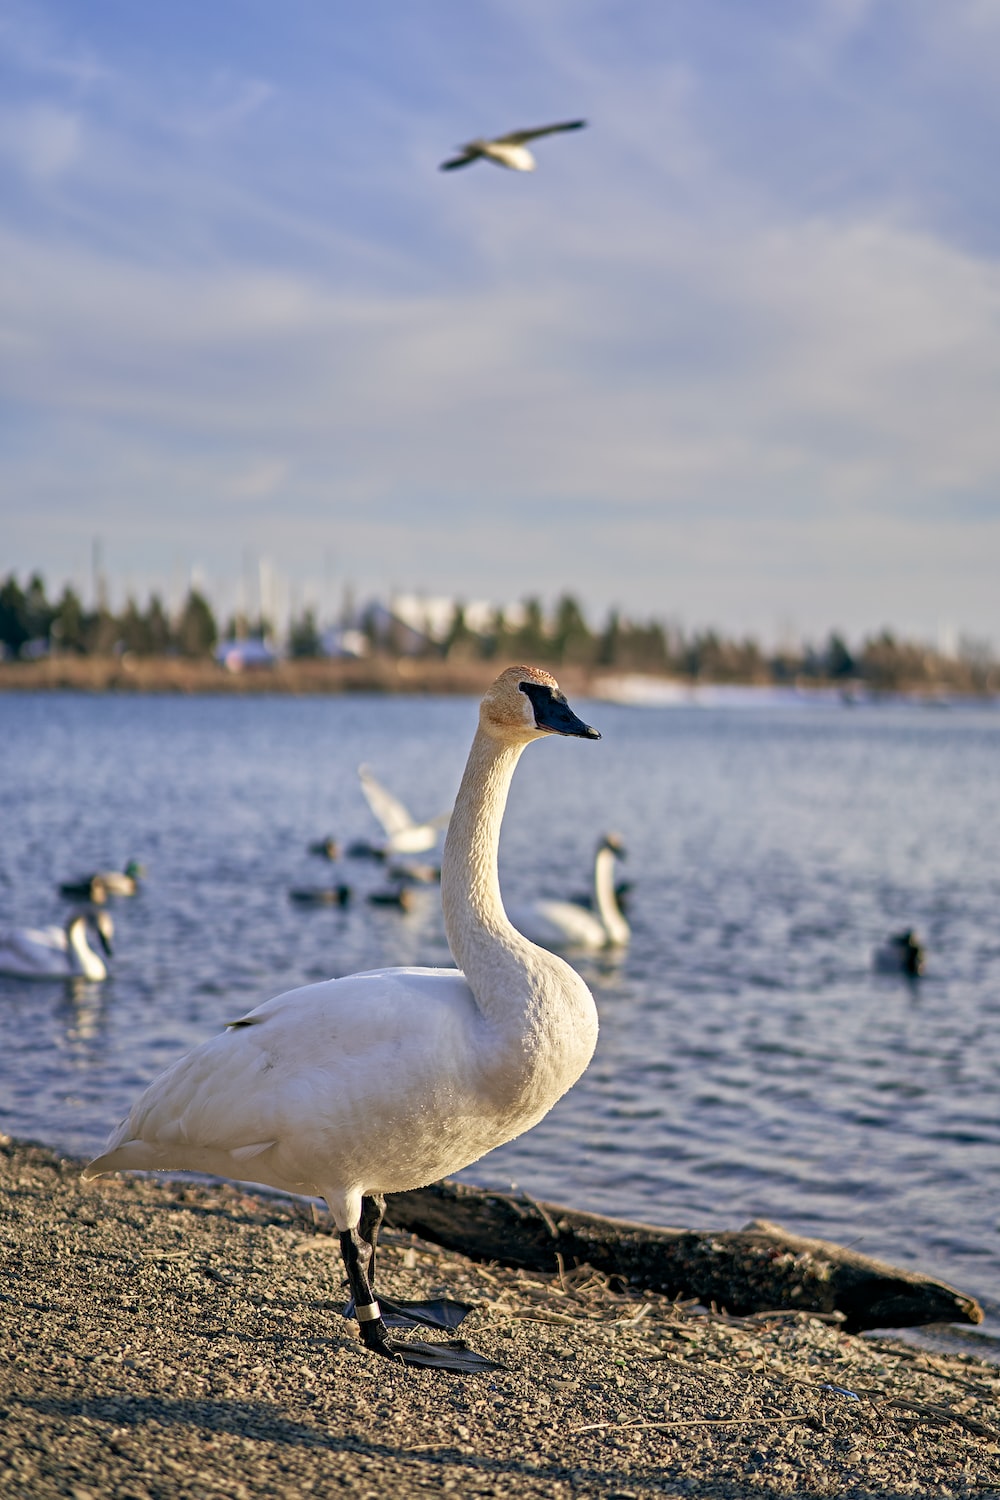 a white bird standing on a beach next to a body of water